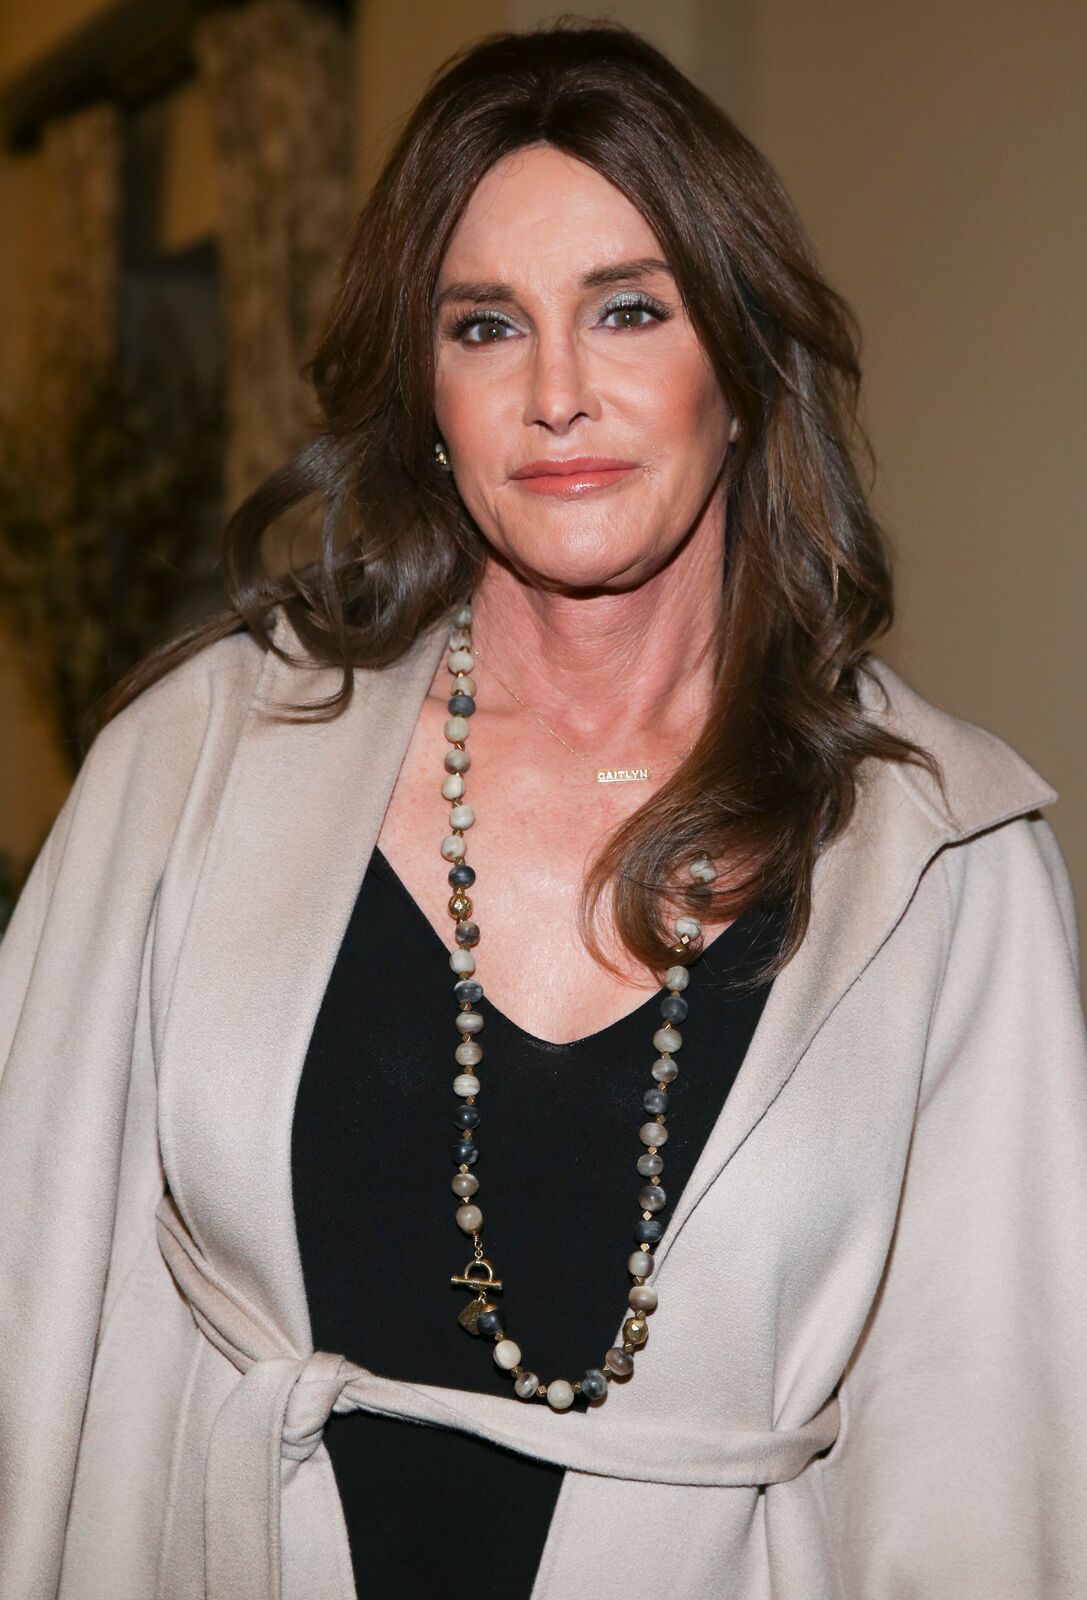 Television personality Caitlyn Jenner attends at the 2016 MAKERS Conference, Day 1 at the Terrenea Resort on February 1, 2016 in Rancho Palos Verdes, California | Photo: Getty Images